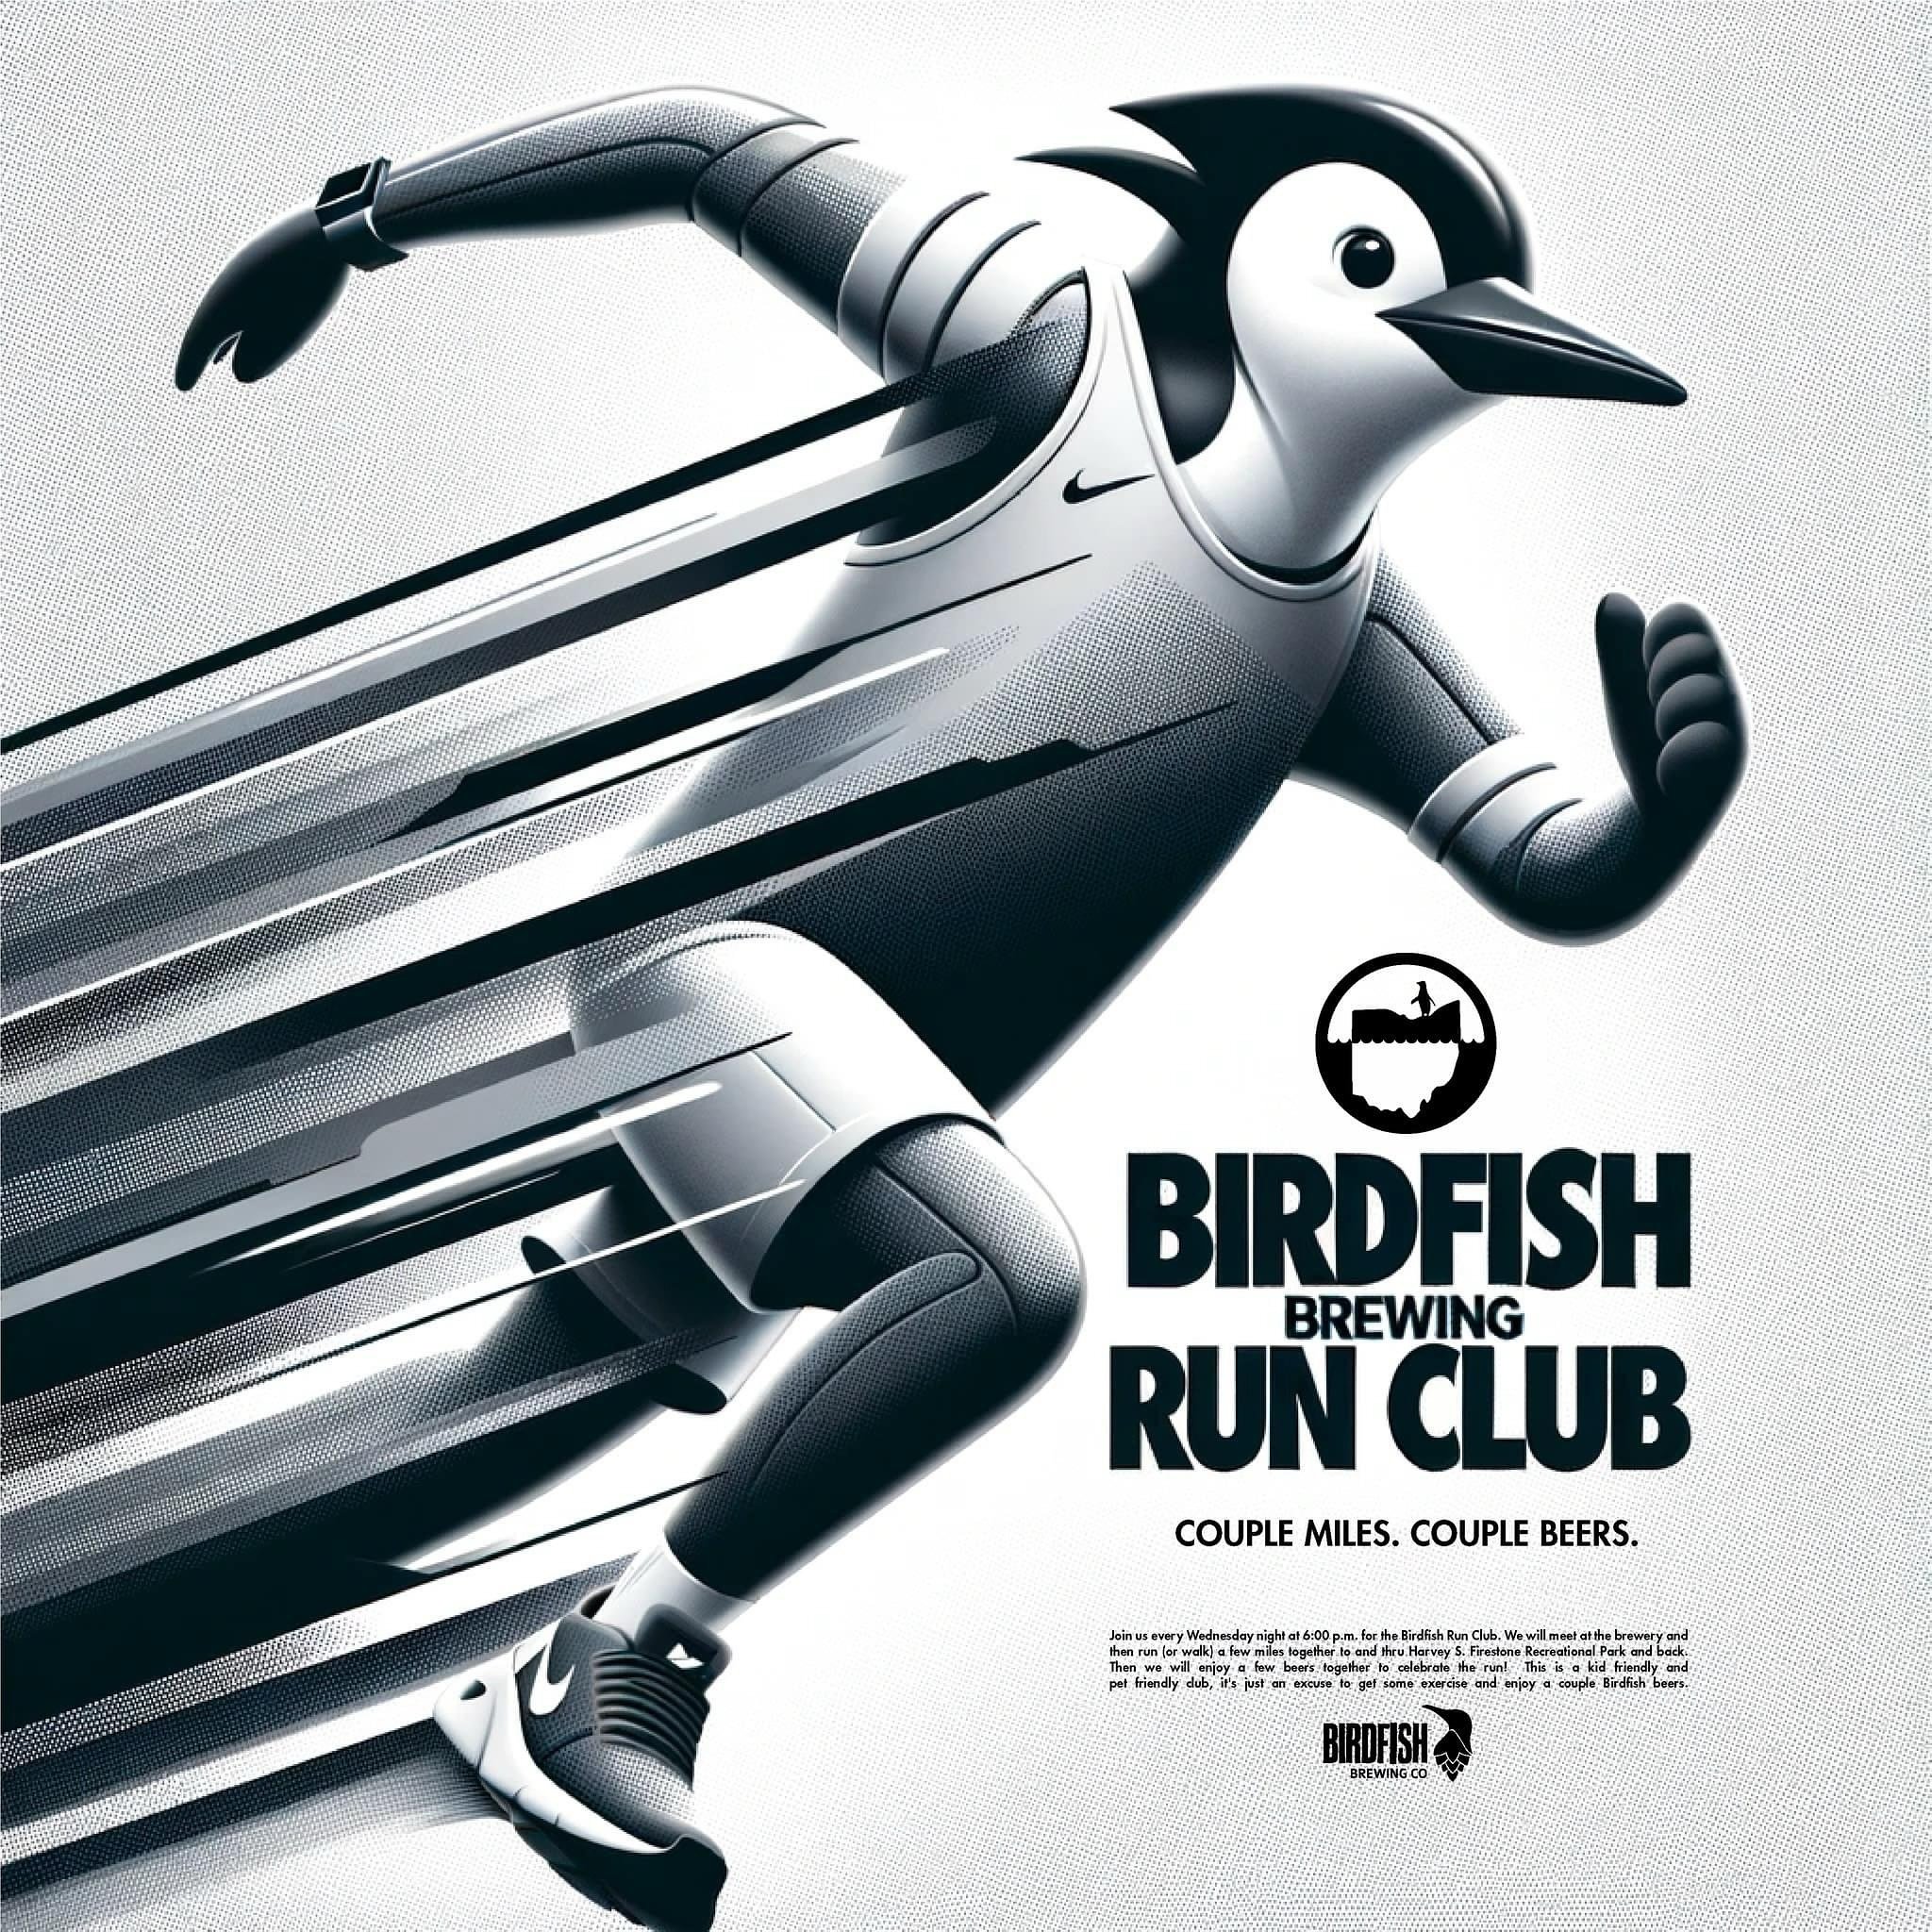 Join us every Wednesday night at 6:00 p.m. for the Birdfish Run Club. We will meet at the brewery and then run (or walk) a few miles together to and thru Harvey S. Firestone Recreational Park and back. Then we will enjoy a few beers together to celeb